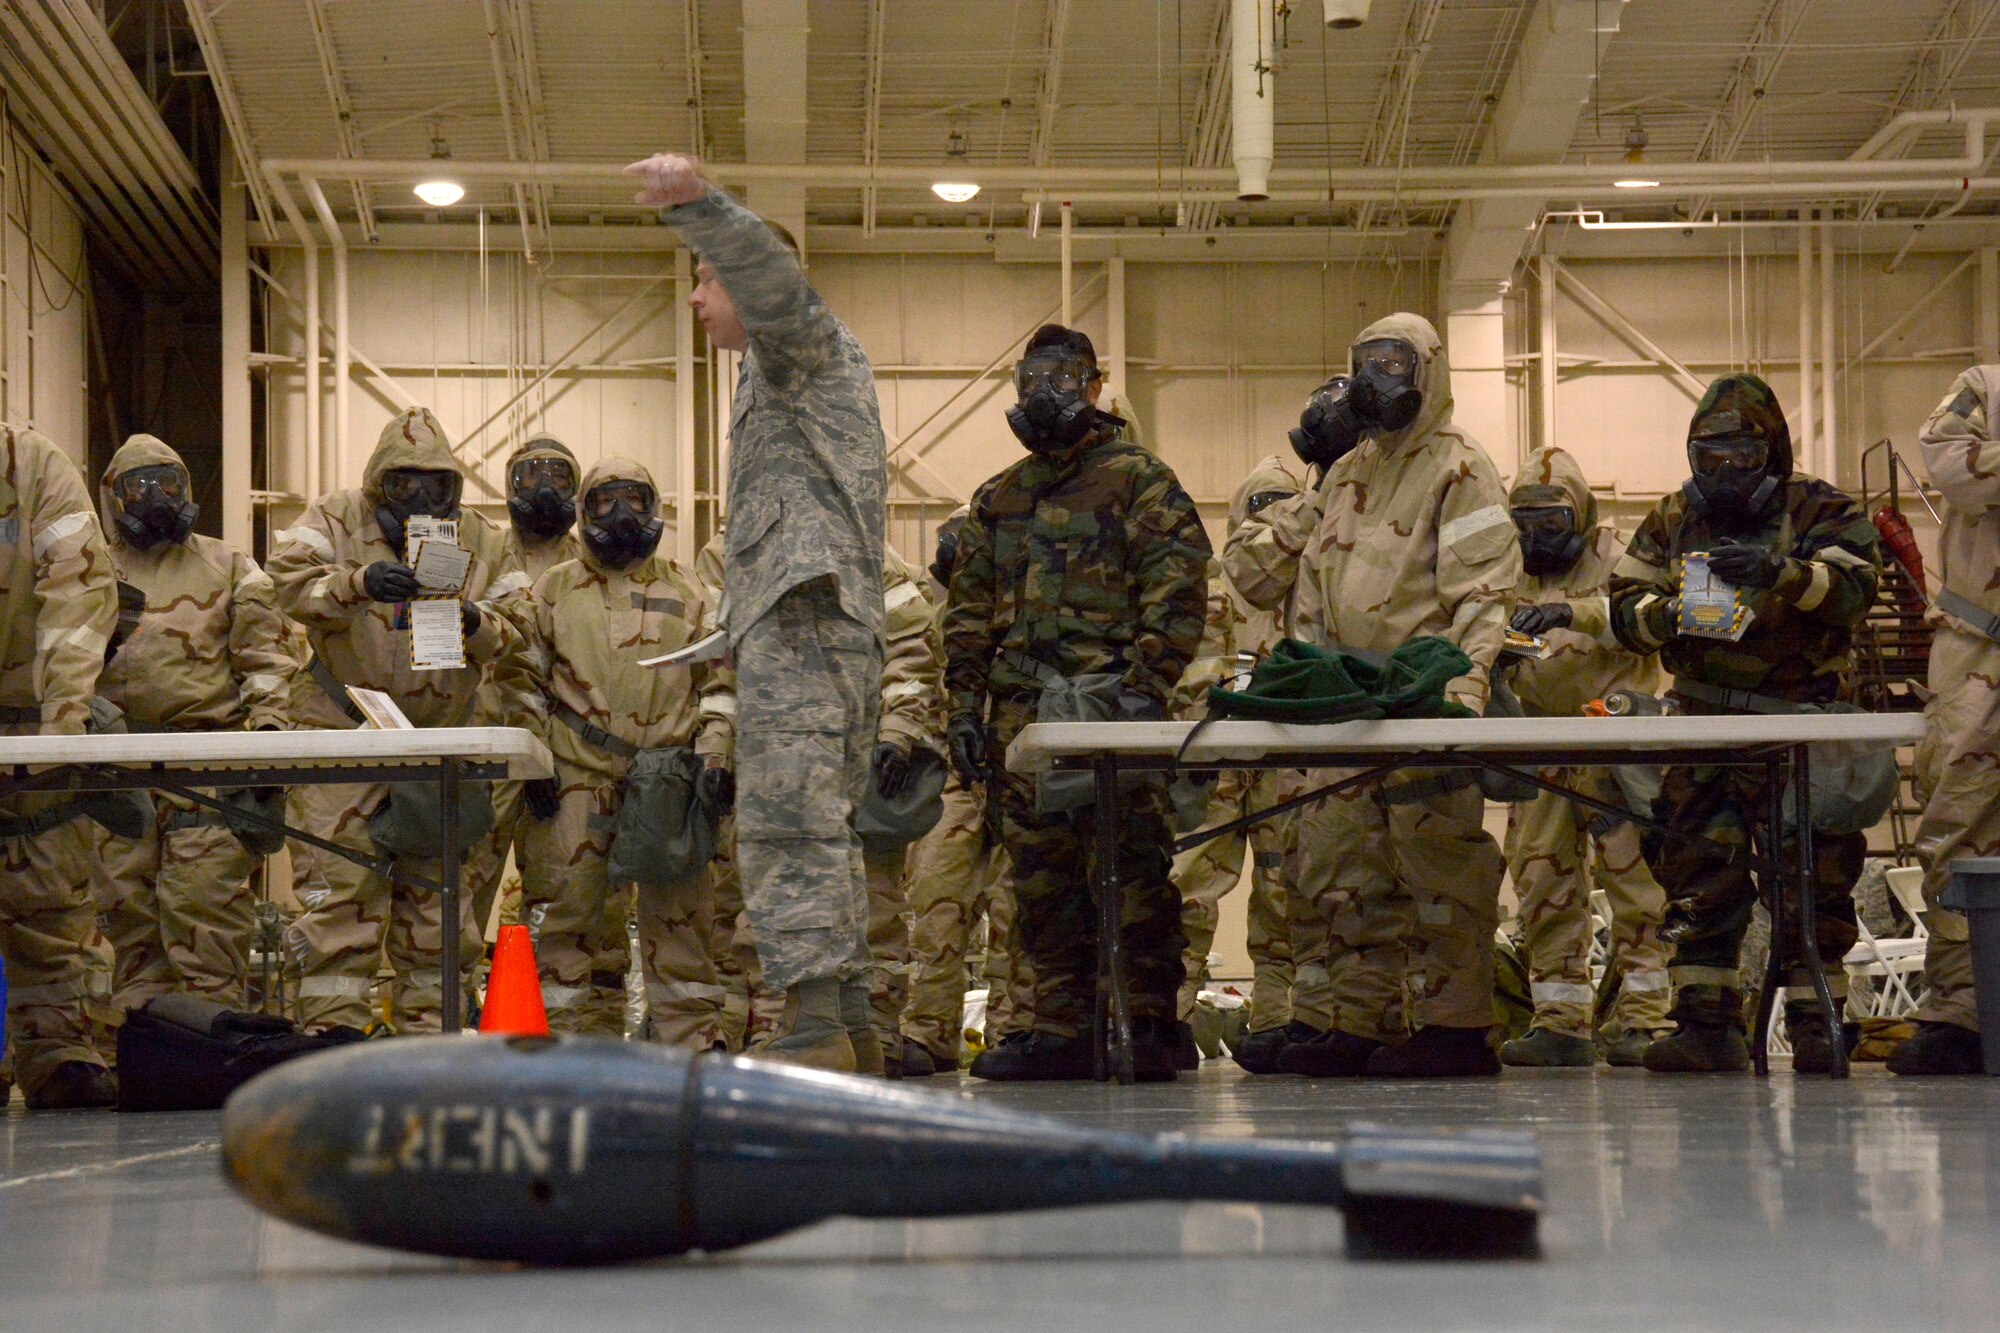 U.S. Air Force Staff Sgt. Ronald Hardison, a member of the 145th Airlift Wing, Emergency Management team, gives a hands-on demonstration of a post attack reconnaissance team’s mission with unexploded ordinances during the Air Expeditionary Skills Rodeo, held Sept. 13, 2015, in a hangar at the North Carolina Air National Guard Base, Charlotte Douglas International Airport. A par team’s main objectives are to identify UXOs, chemical agent detection and self-aid and buddy care. (U.S. Air National Guard photo by Senior Airman Laura Montgomery, 145th Public Affairs/Released)